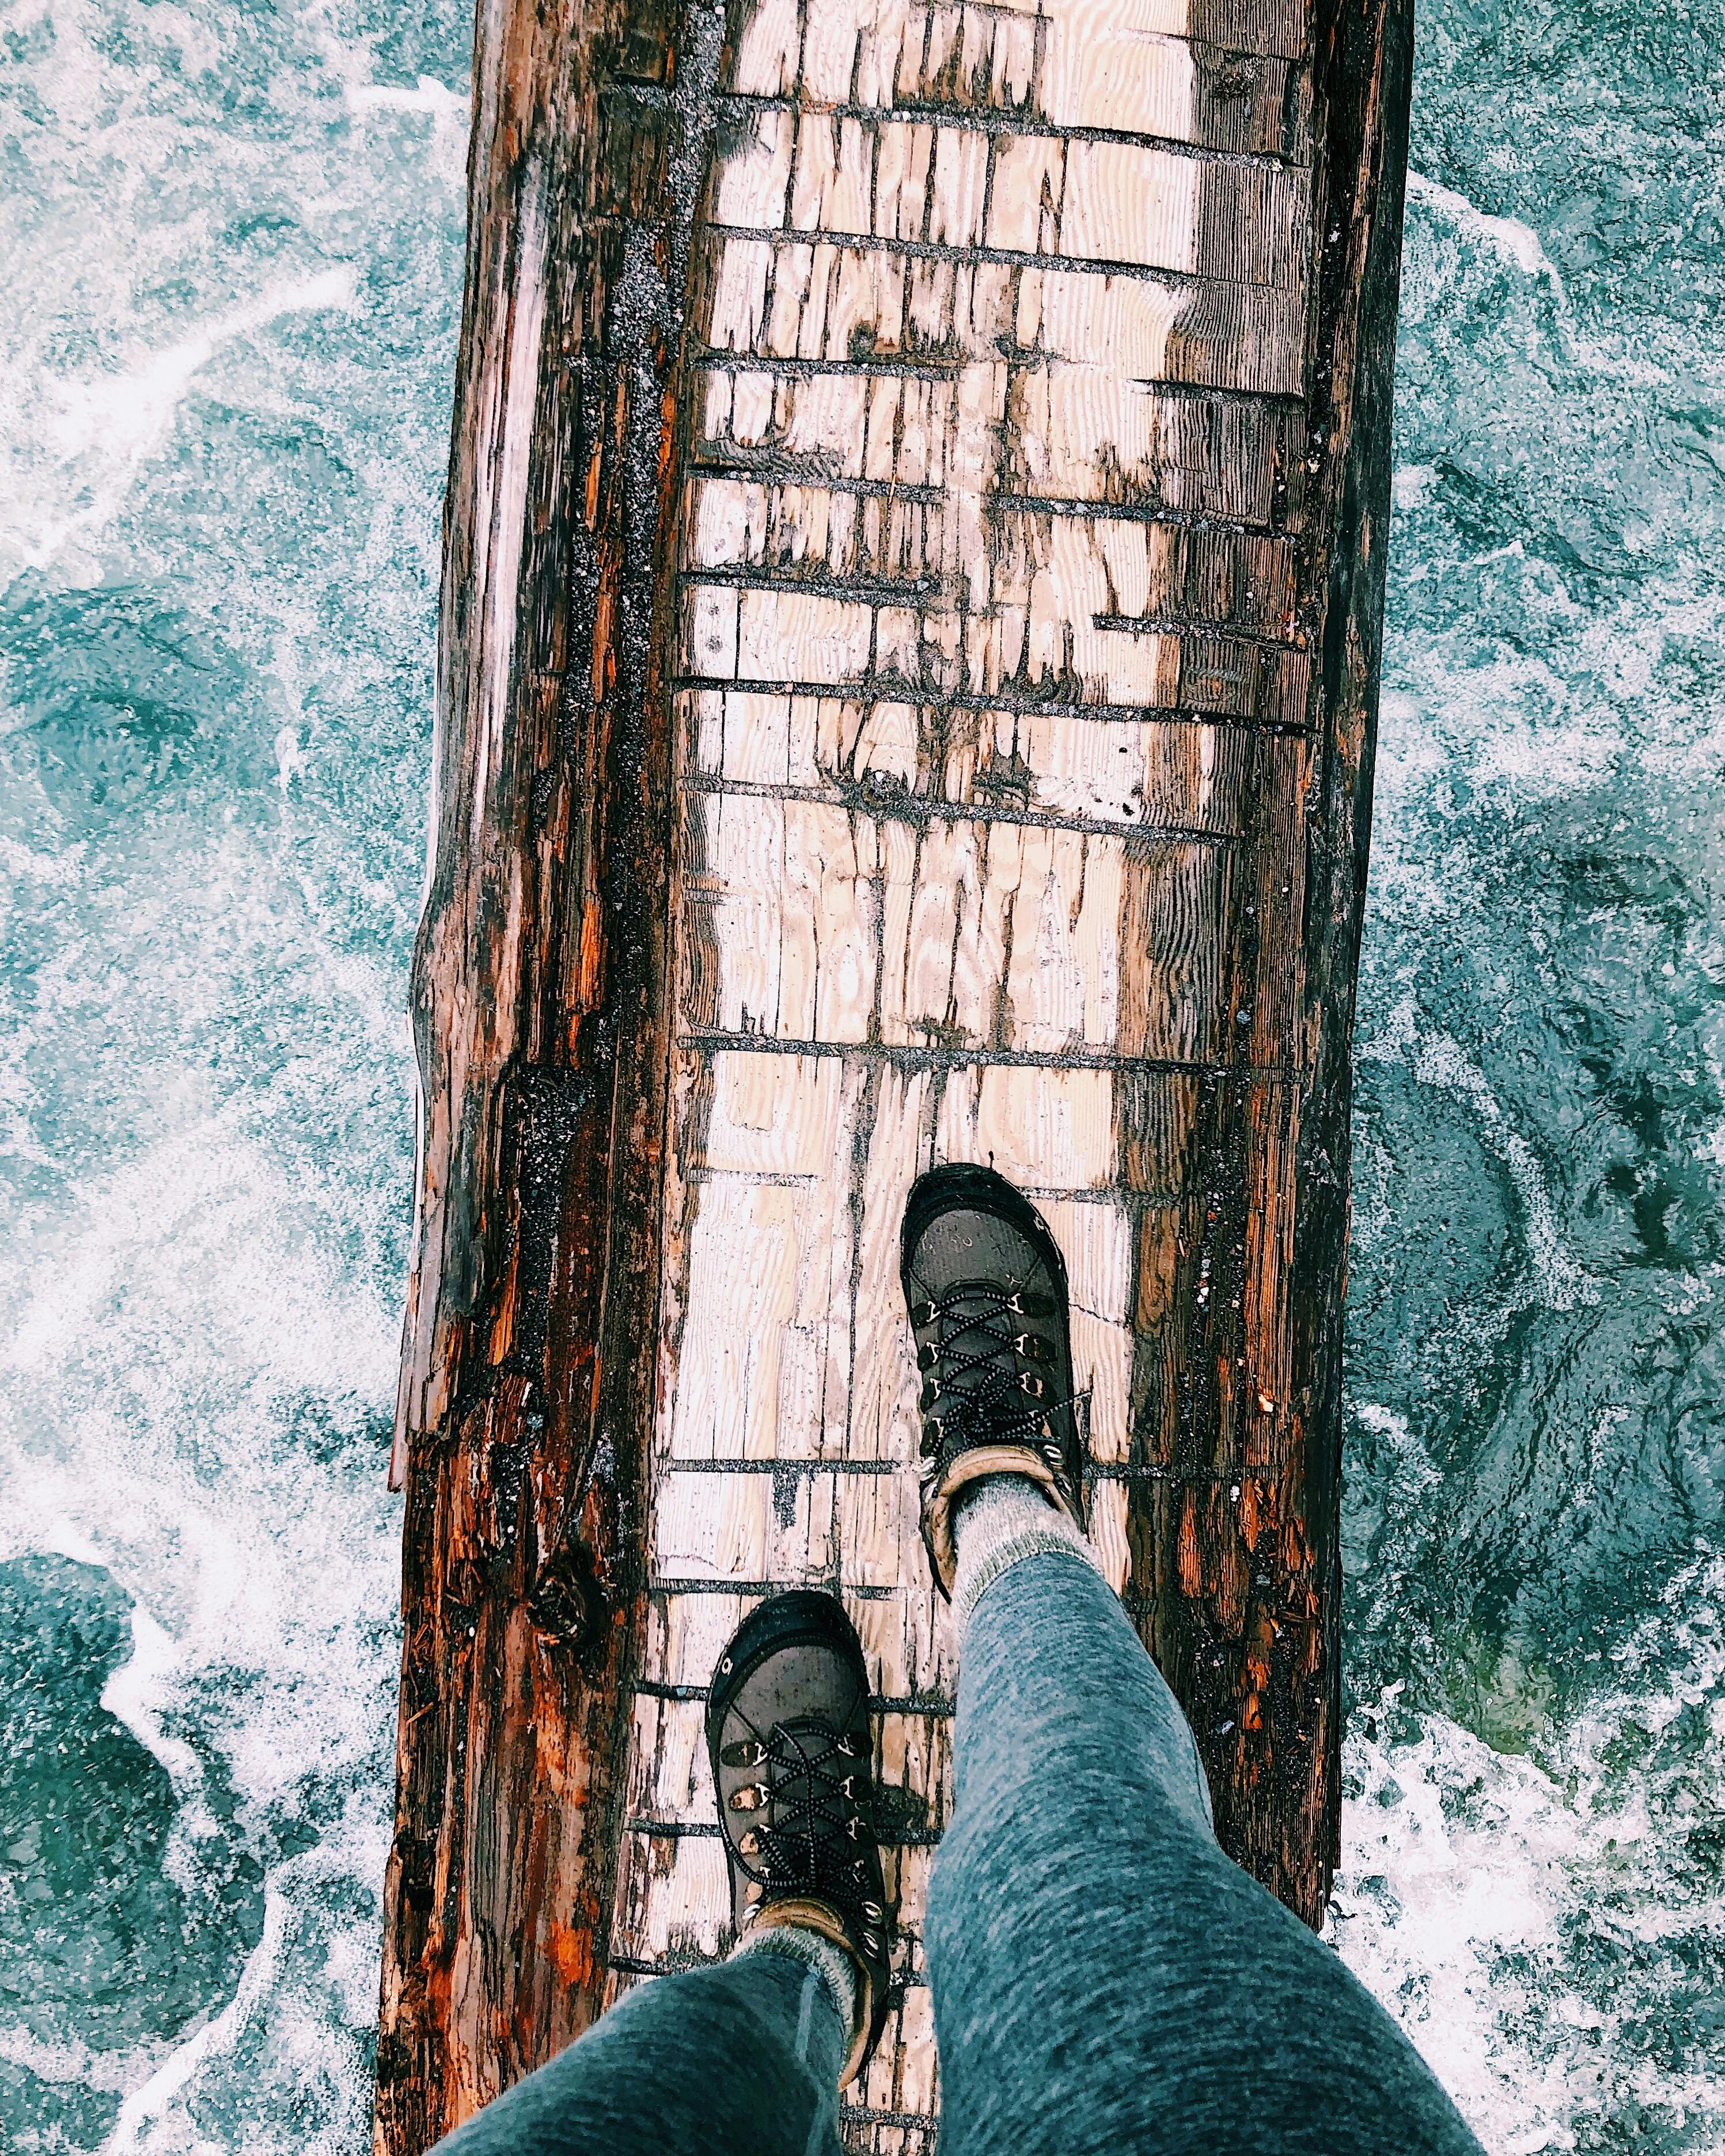 A person walks across a wooden beam suspended over the water